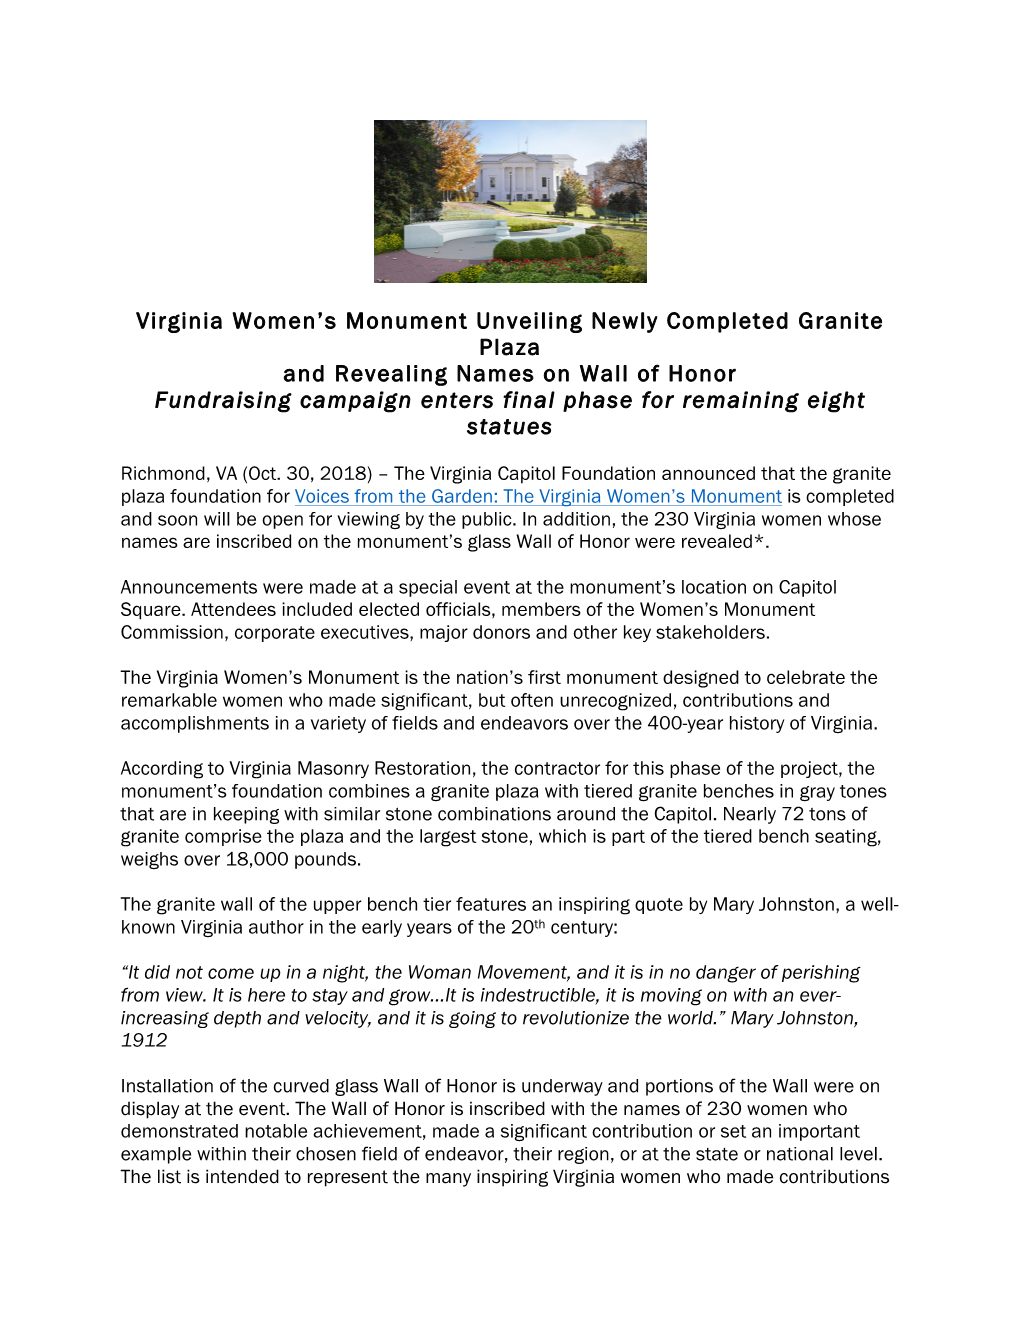 Virginia Women's Monument Unveiling Newly Completed Granite Plaza and Revealing Names on Wall of Honor Fundraising Campaign